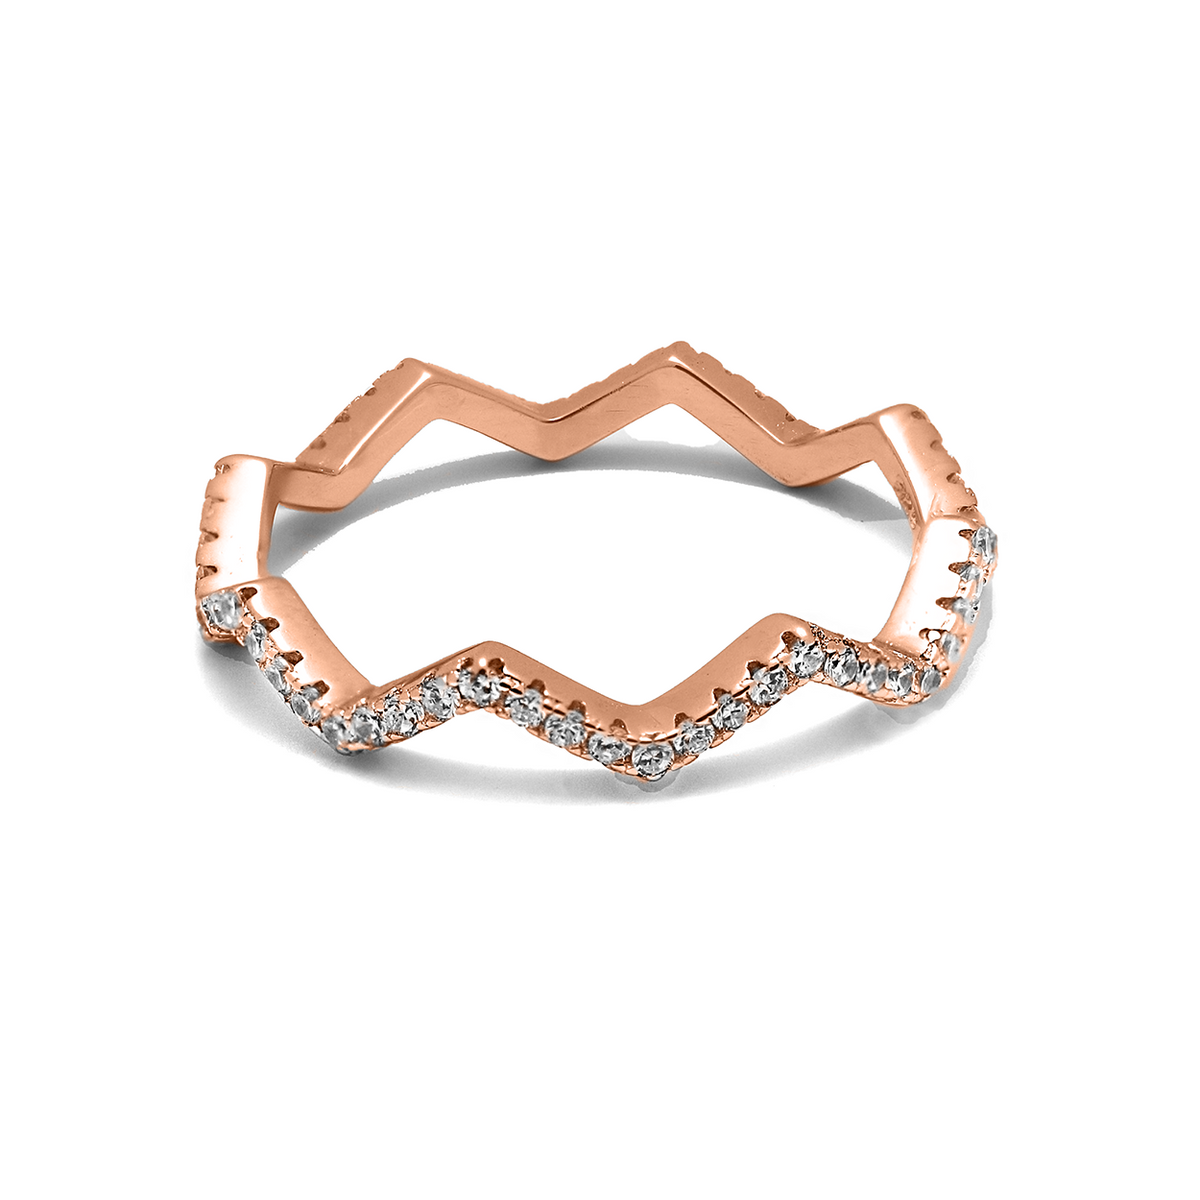 Zig Zag ring set with Cubic Zirconia Sterling Silver plated in 18KT Rose Gold